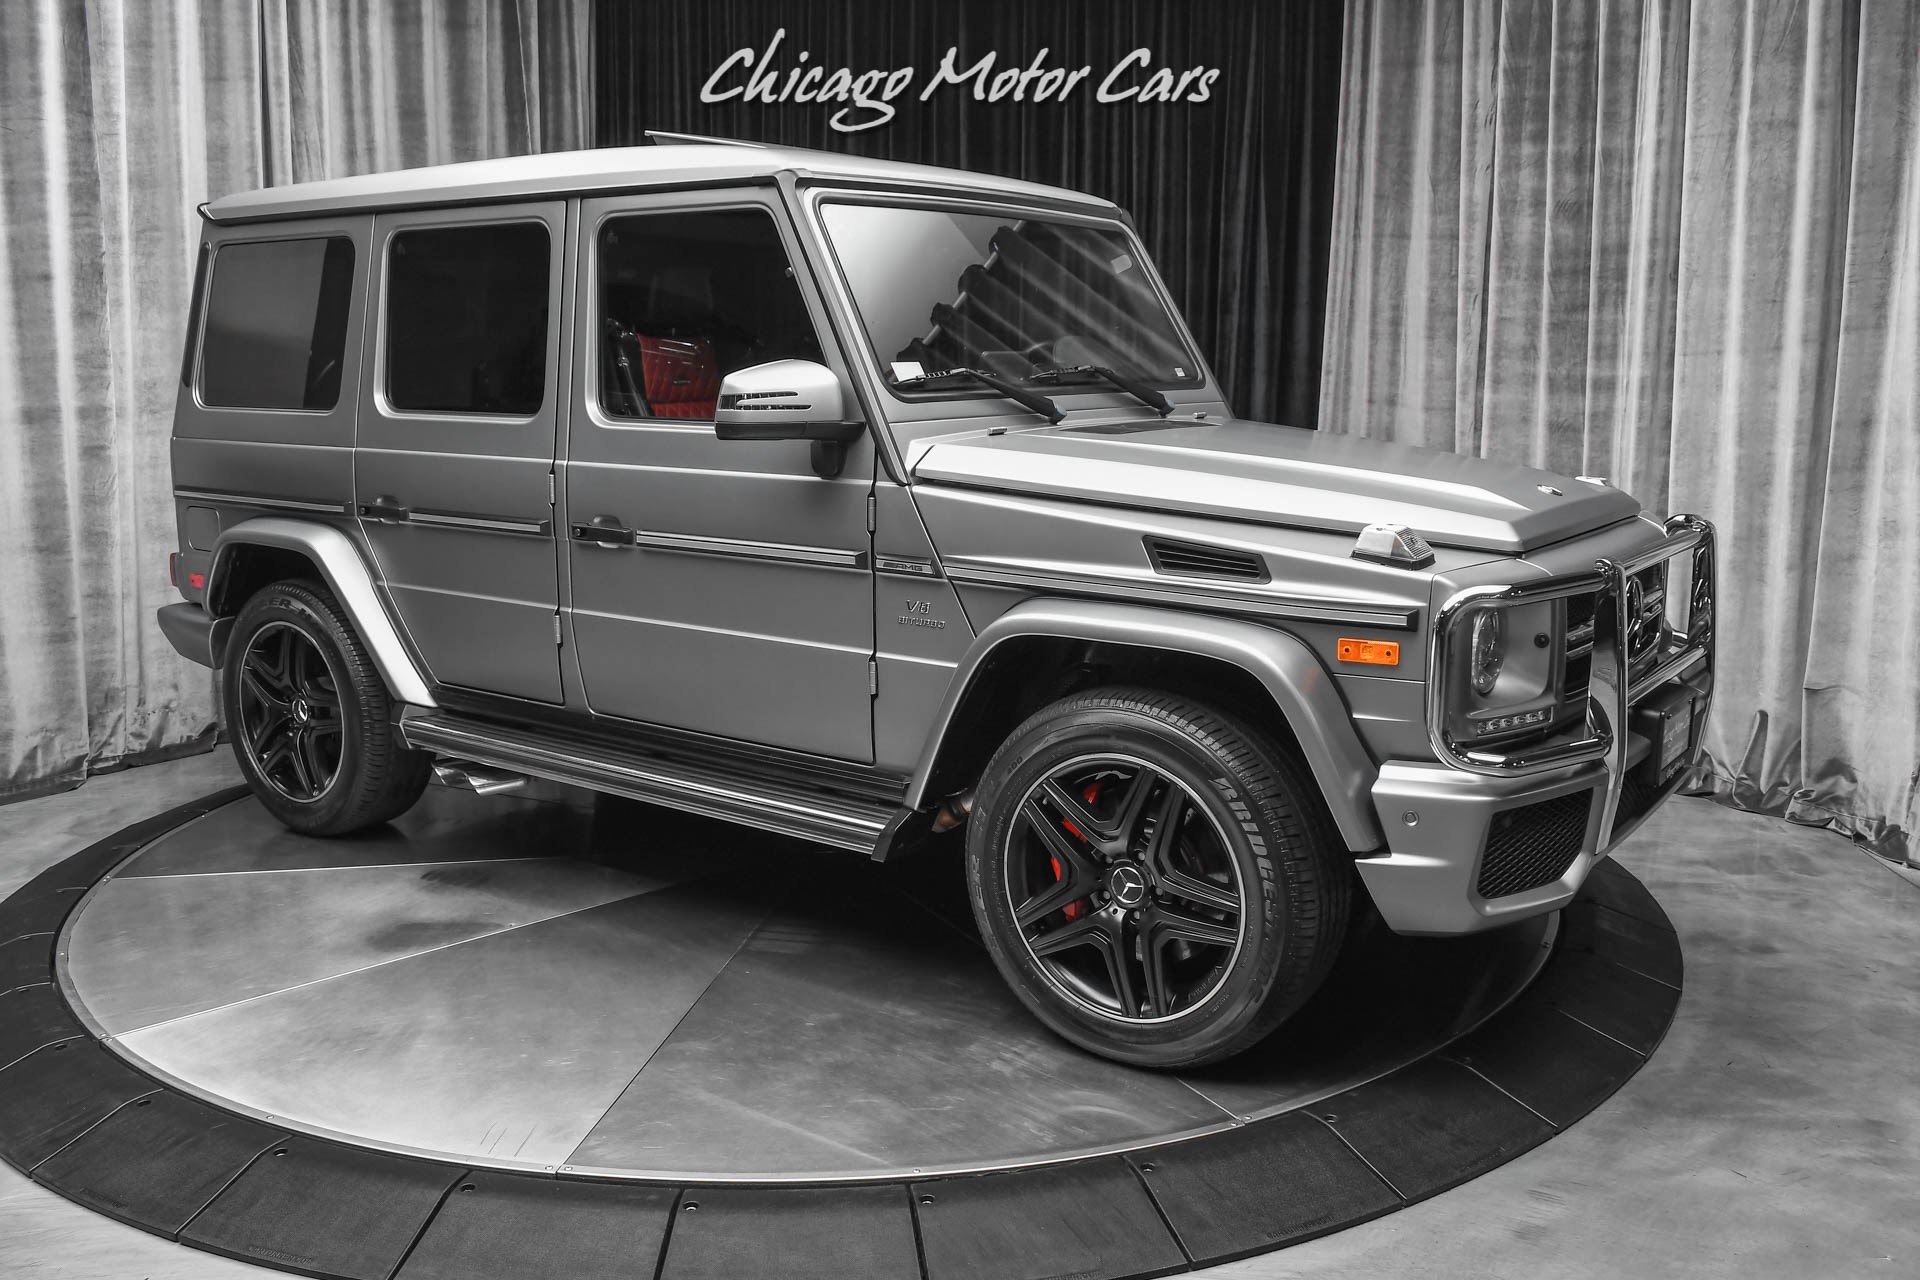 Used-2018-Mercedes-Benz-G63-AMG-4Matic-SUV-Hot-Color-Combo-Exclusive-Nappa-Interior-AMG-Carbon-Fiber